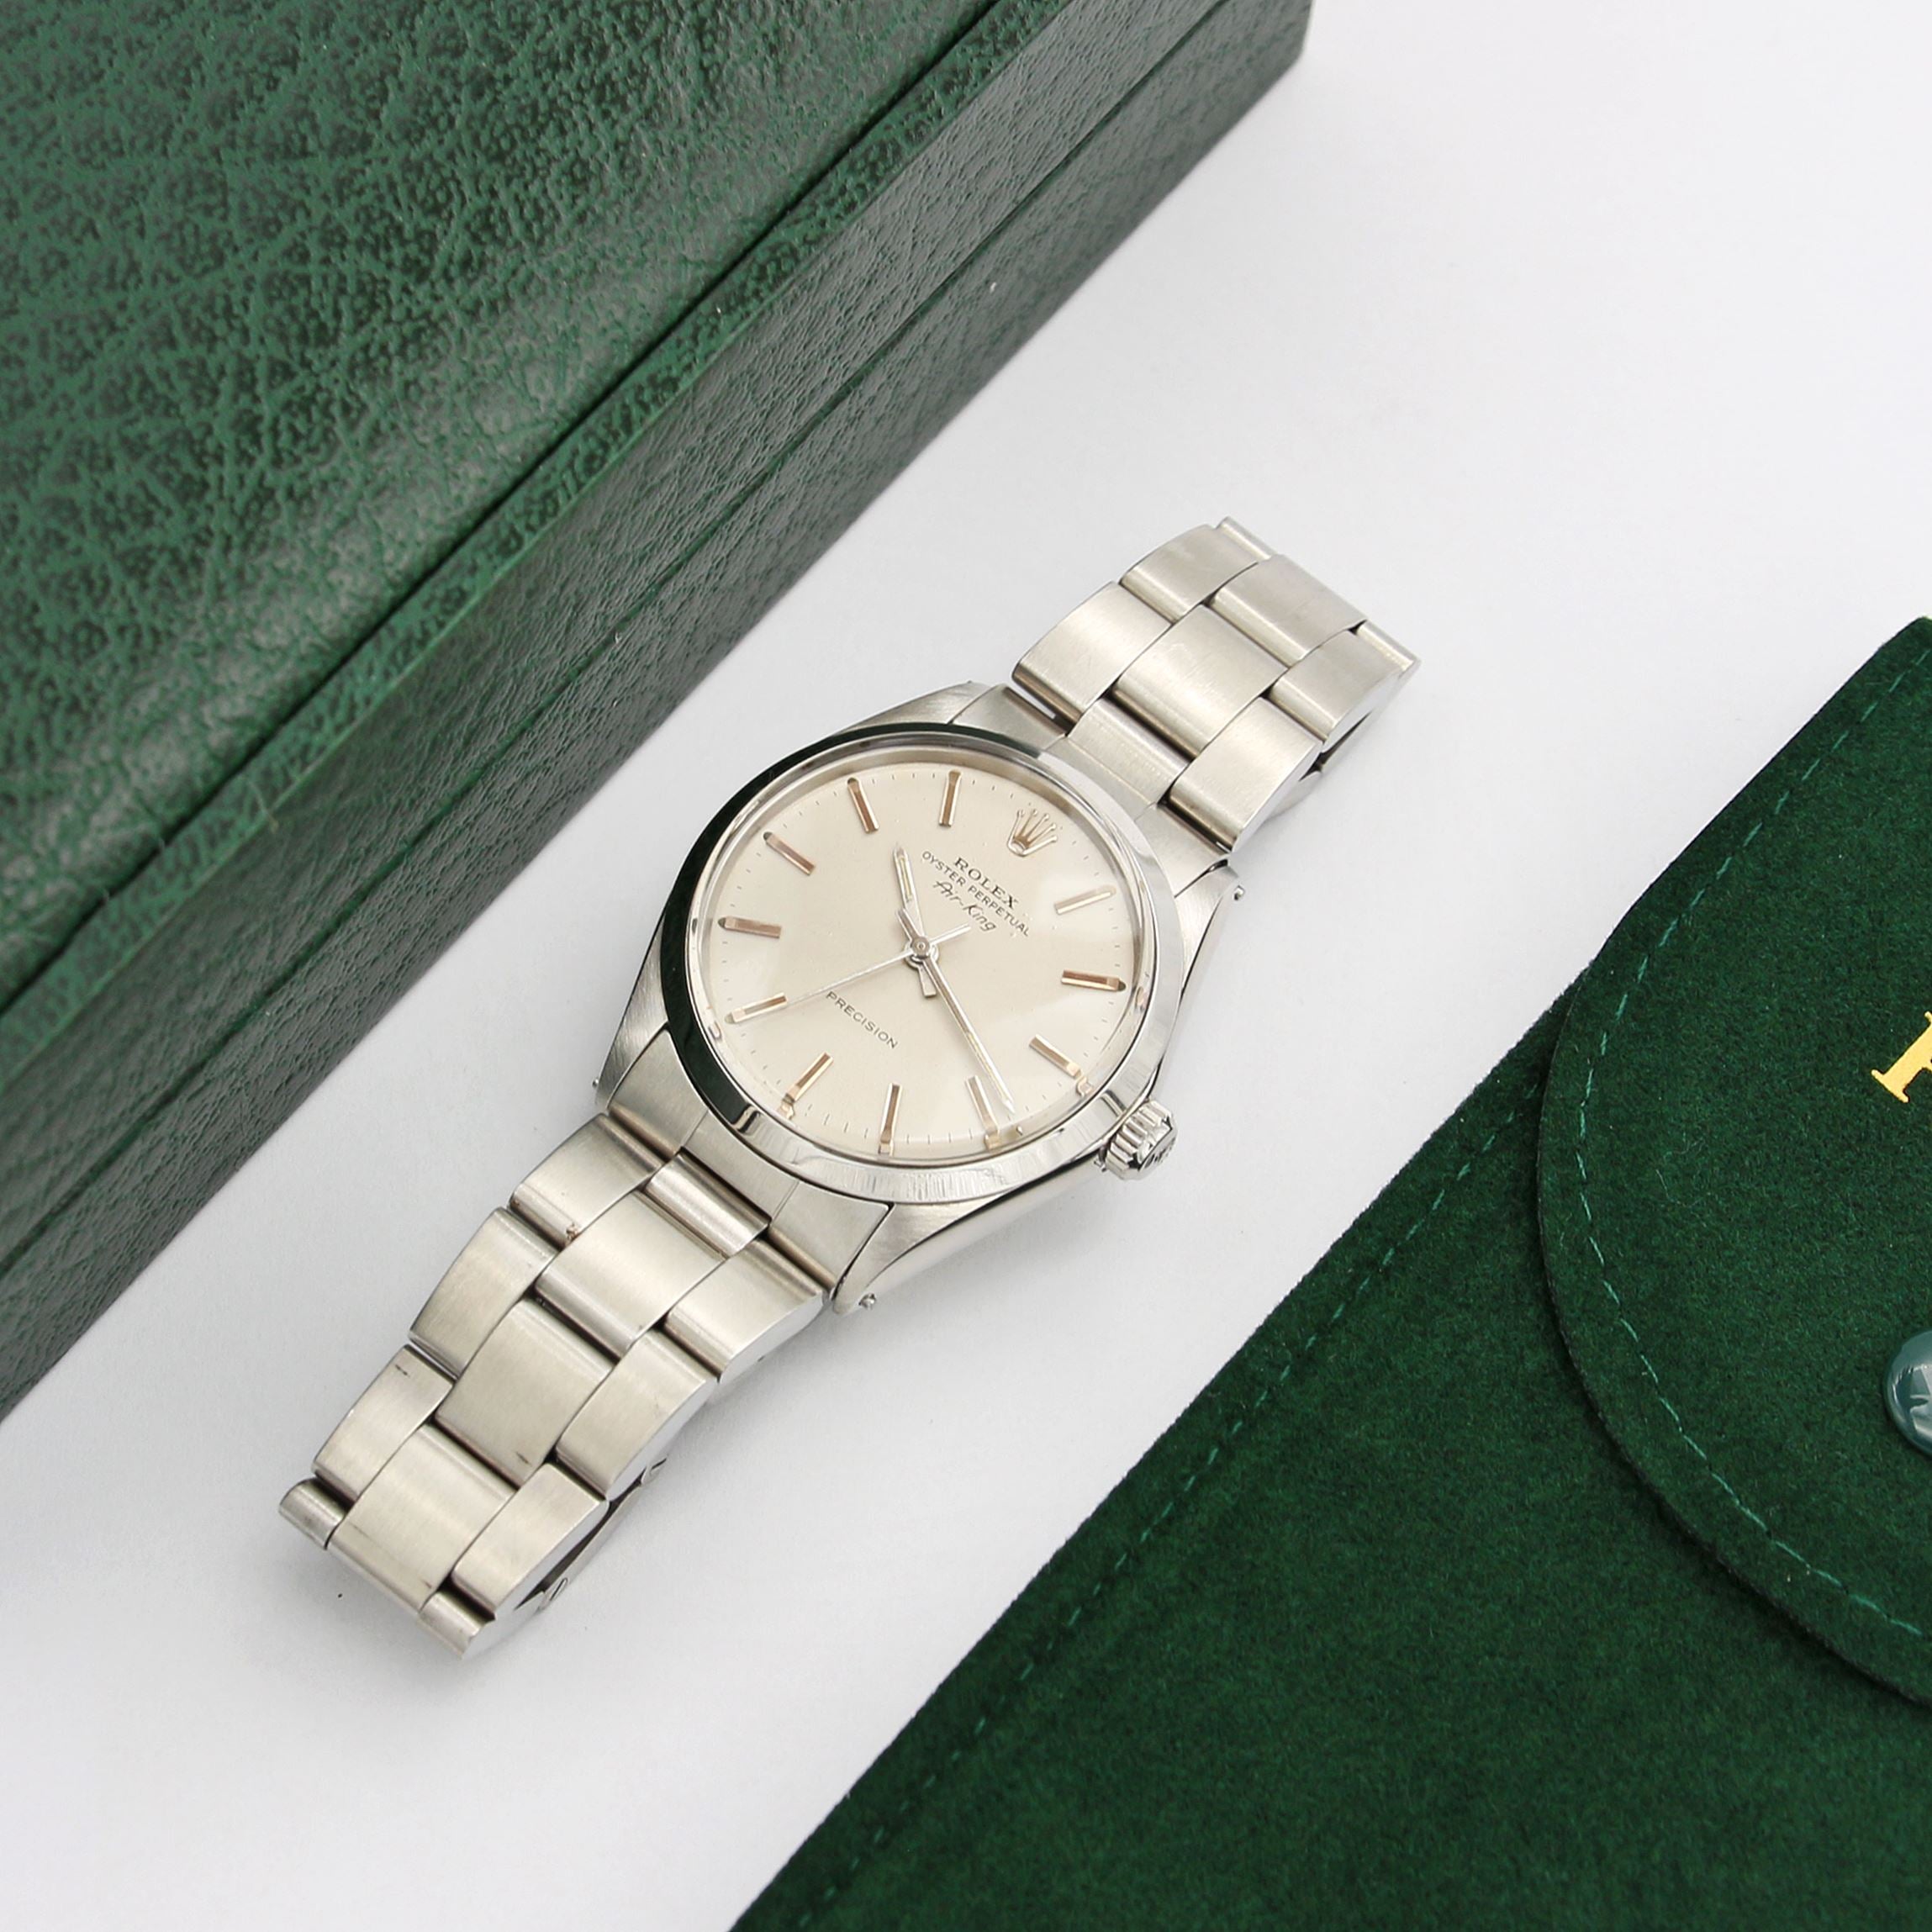 Rolex Air-King ref. 5500 Silver dial - Oyster bracelet